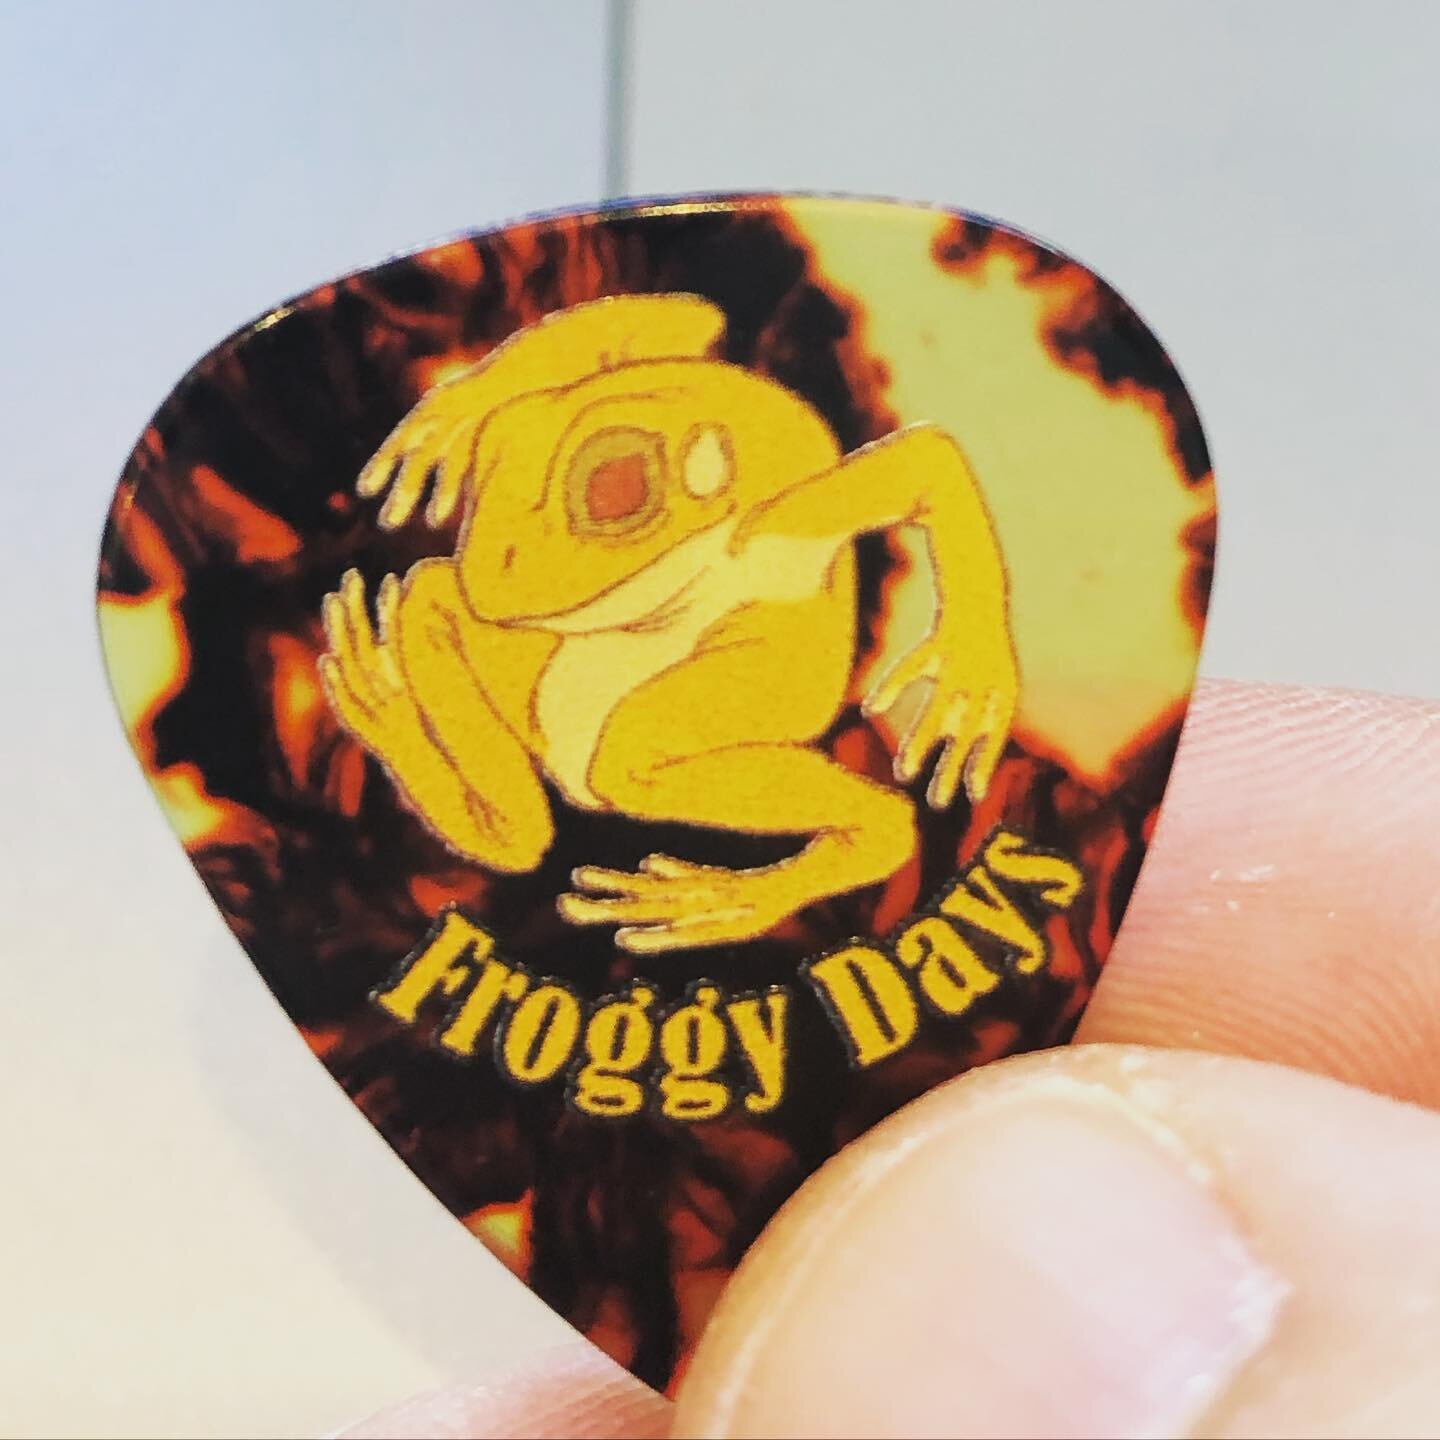 I&rsquo;m a little sad that I didn&rsquo;t try these picks sooner. Thank you @fropomolo for such a sweet gift. These picks rule! #newpicks #froggydays #kwawesome #wilmotstrongertogether #morepracticeneeded